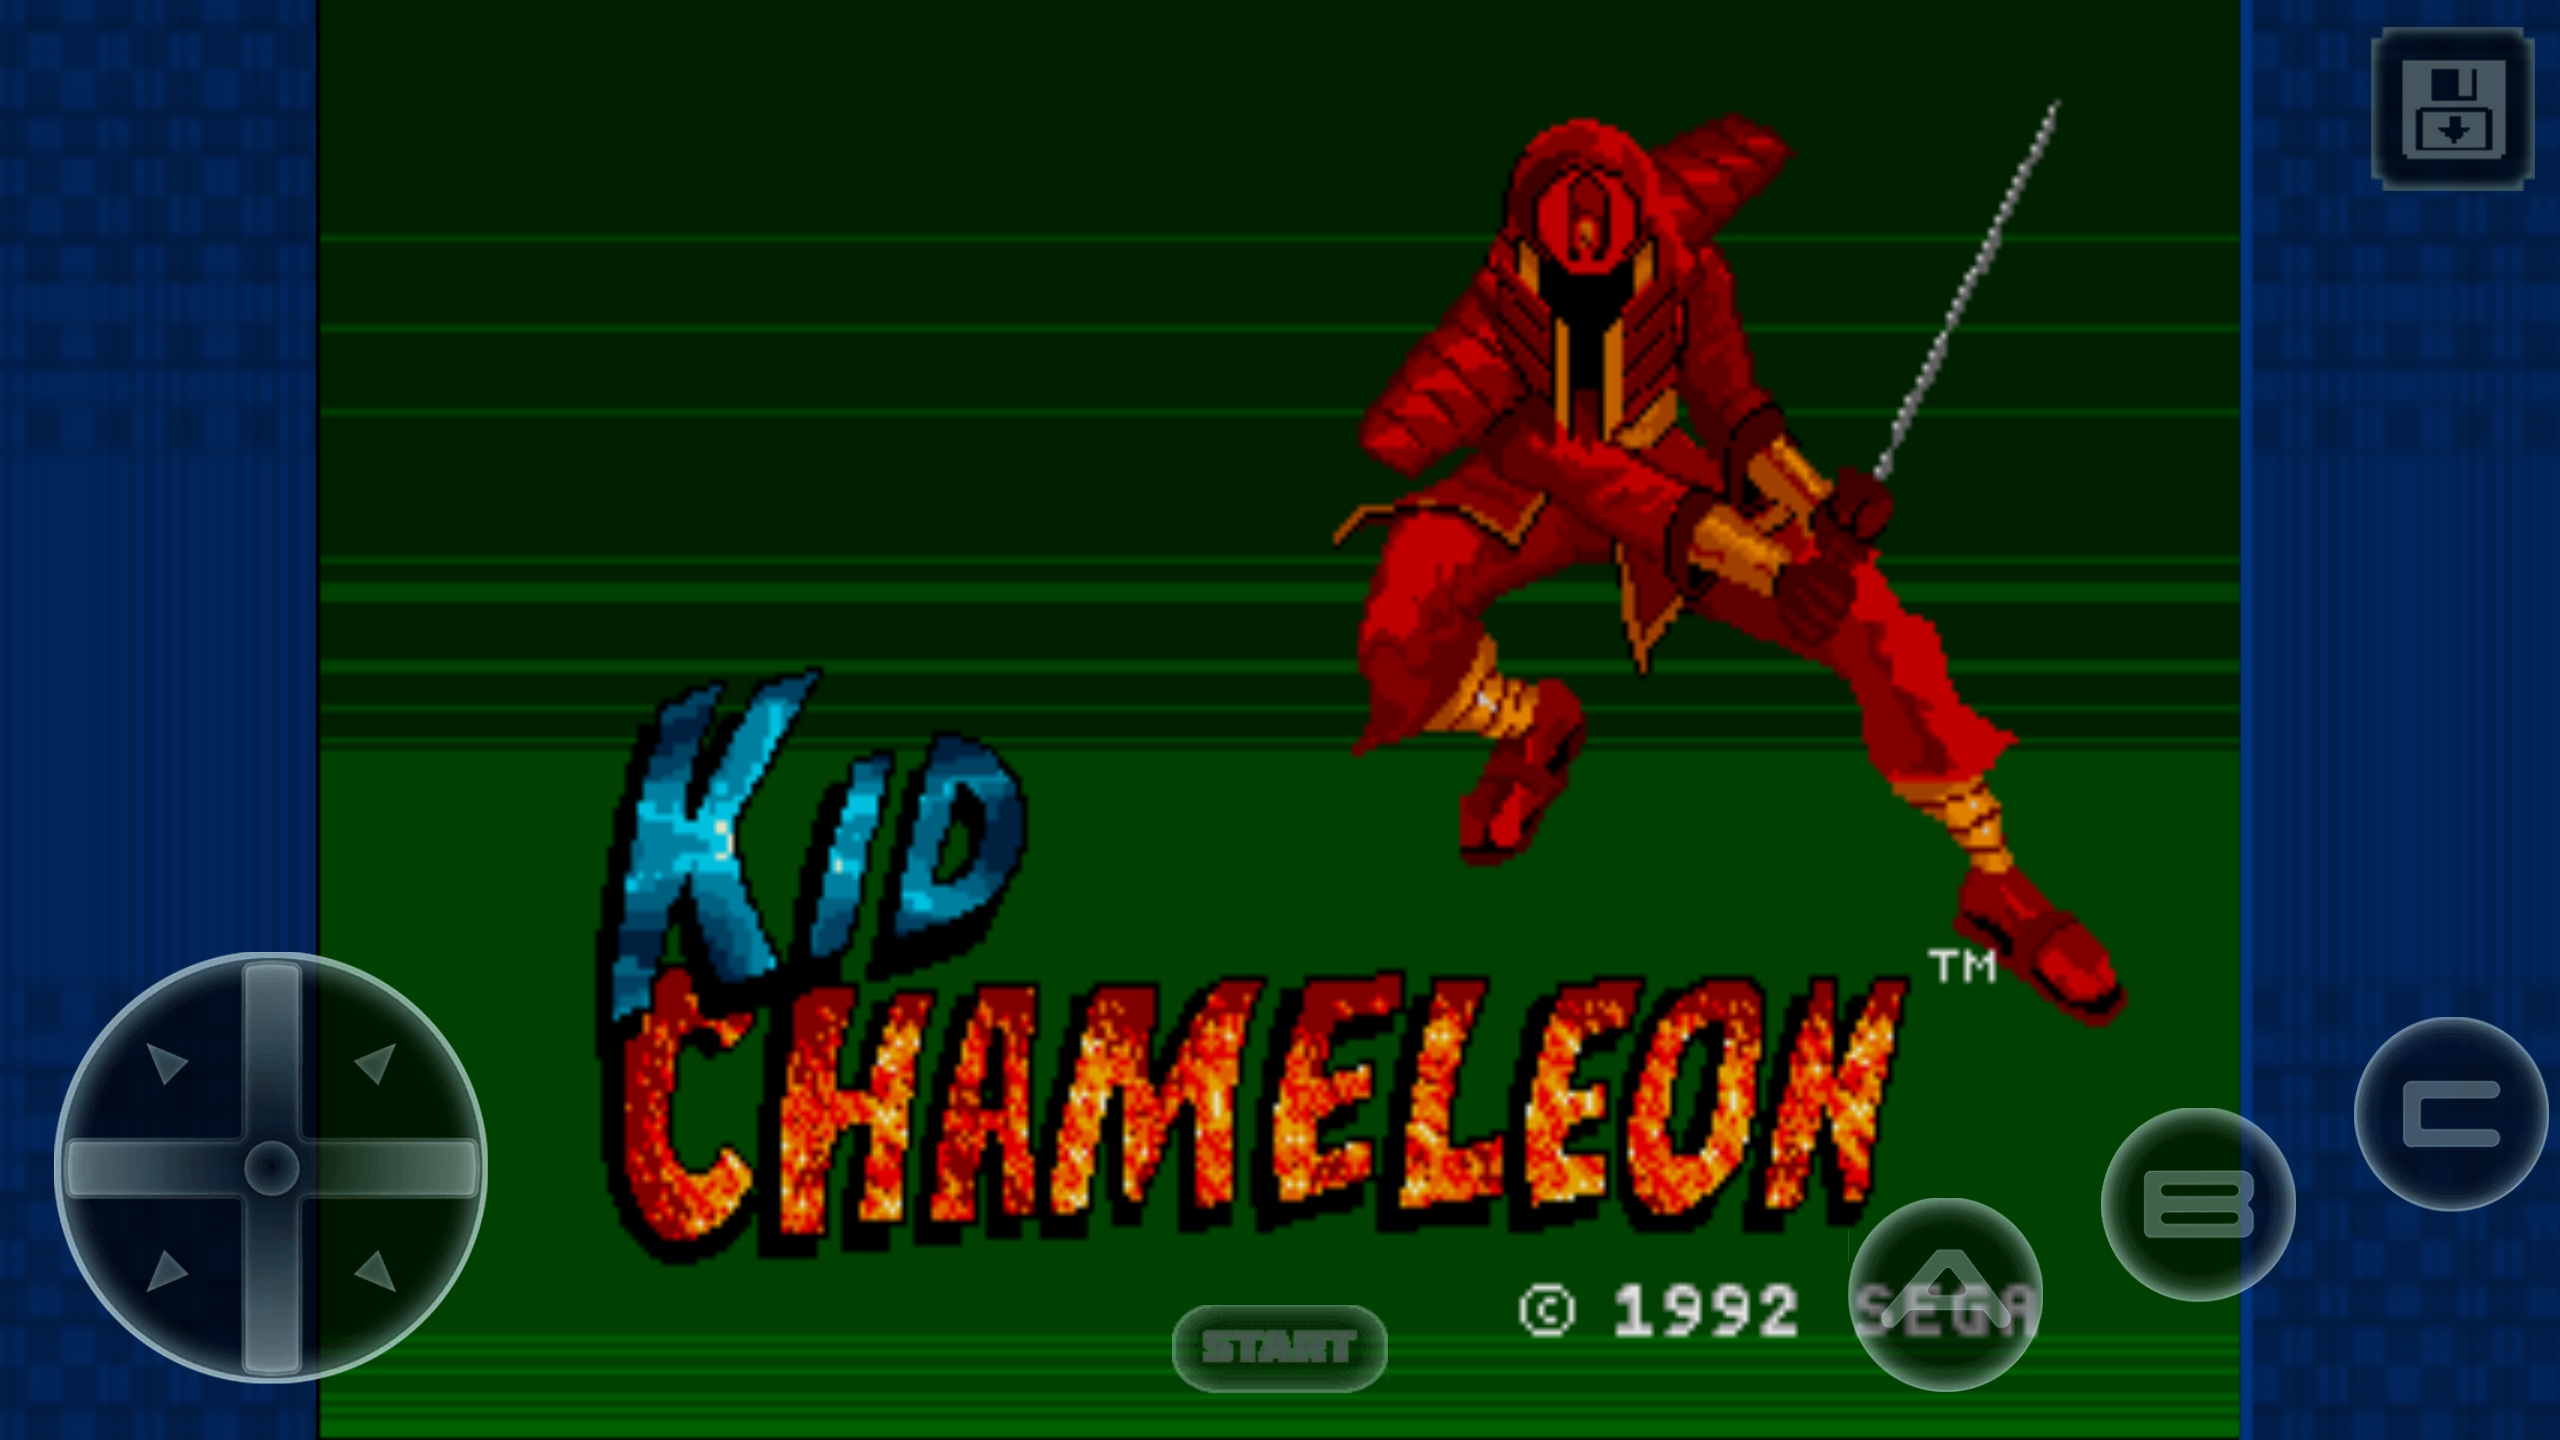 Kid Chameleon, most certainly the raddest game of the lineup, in its Sega Forever form - Most Sega Forever titles are a buggy mess, here's why